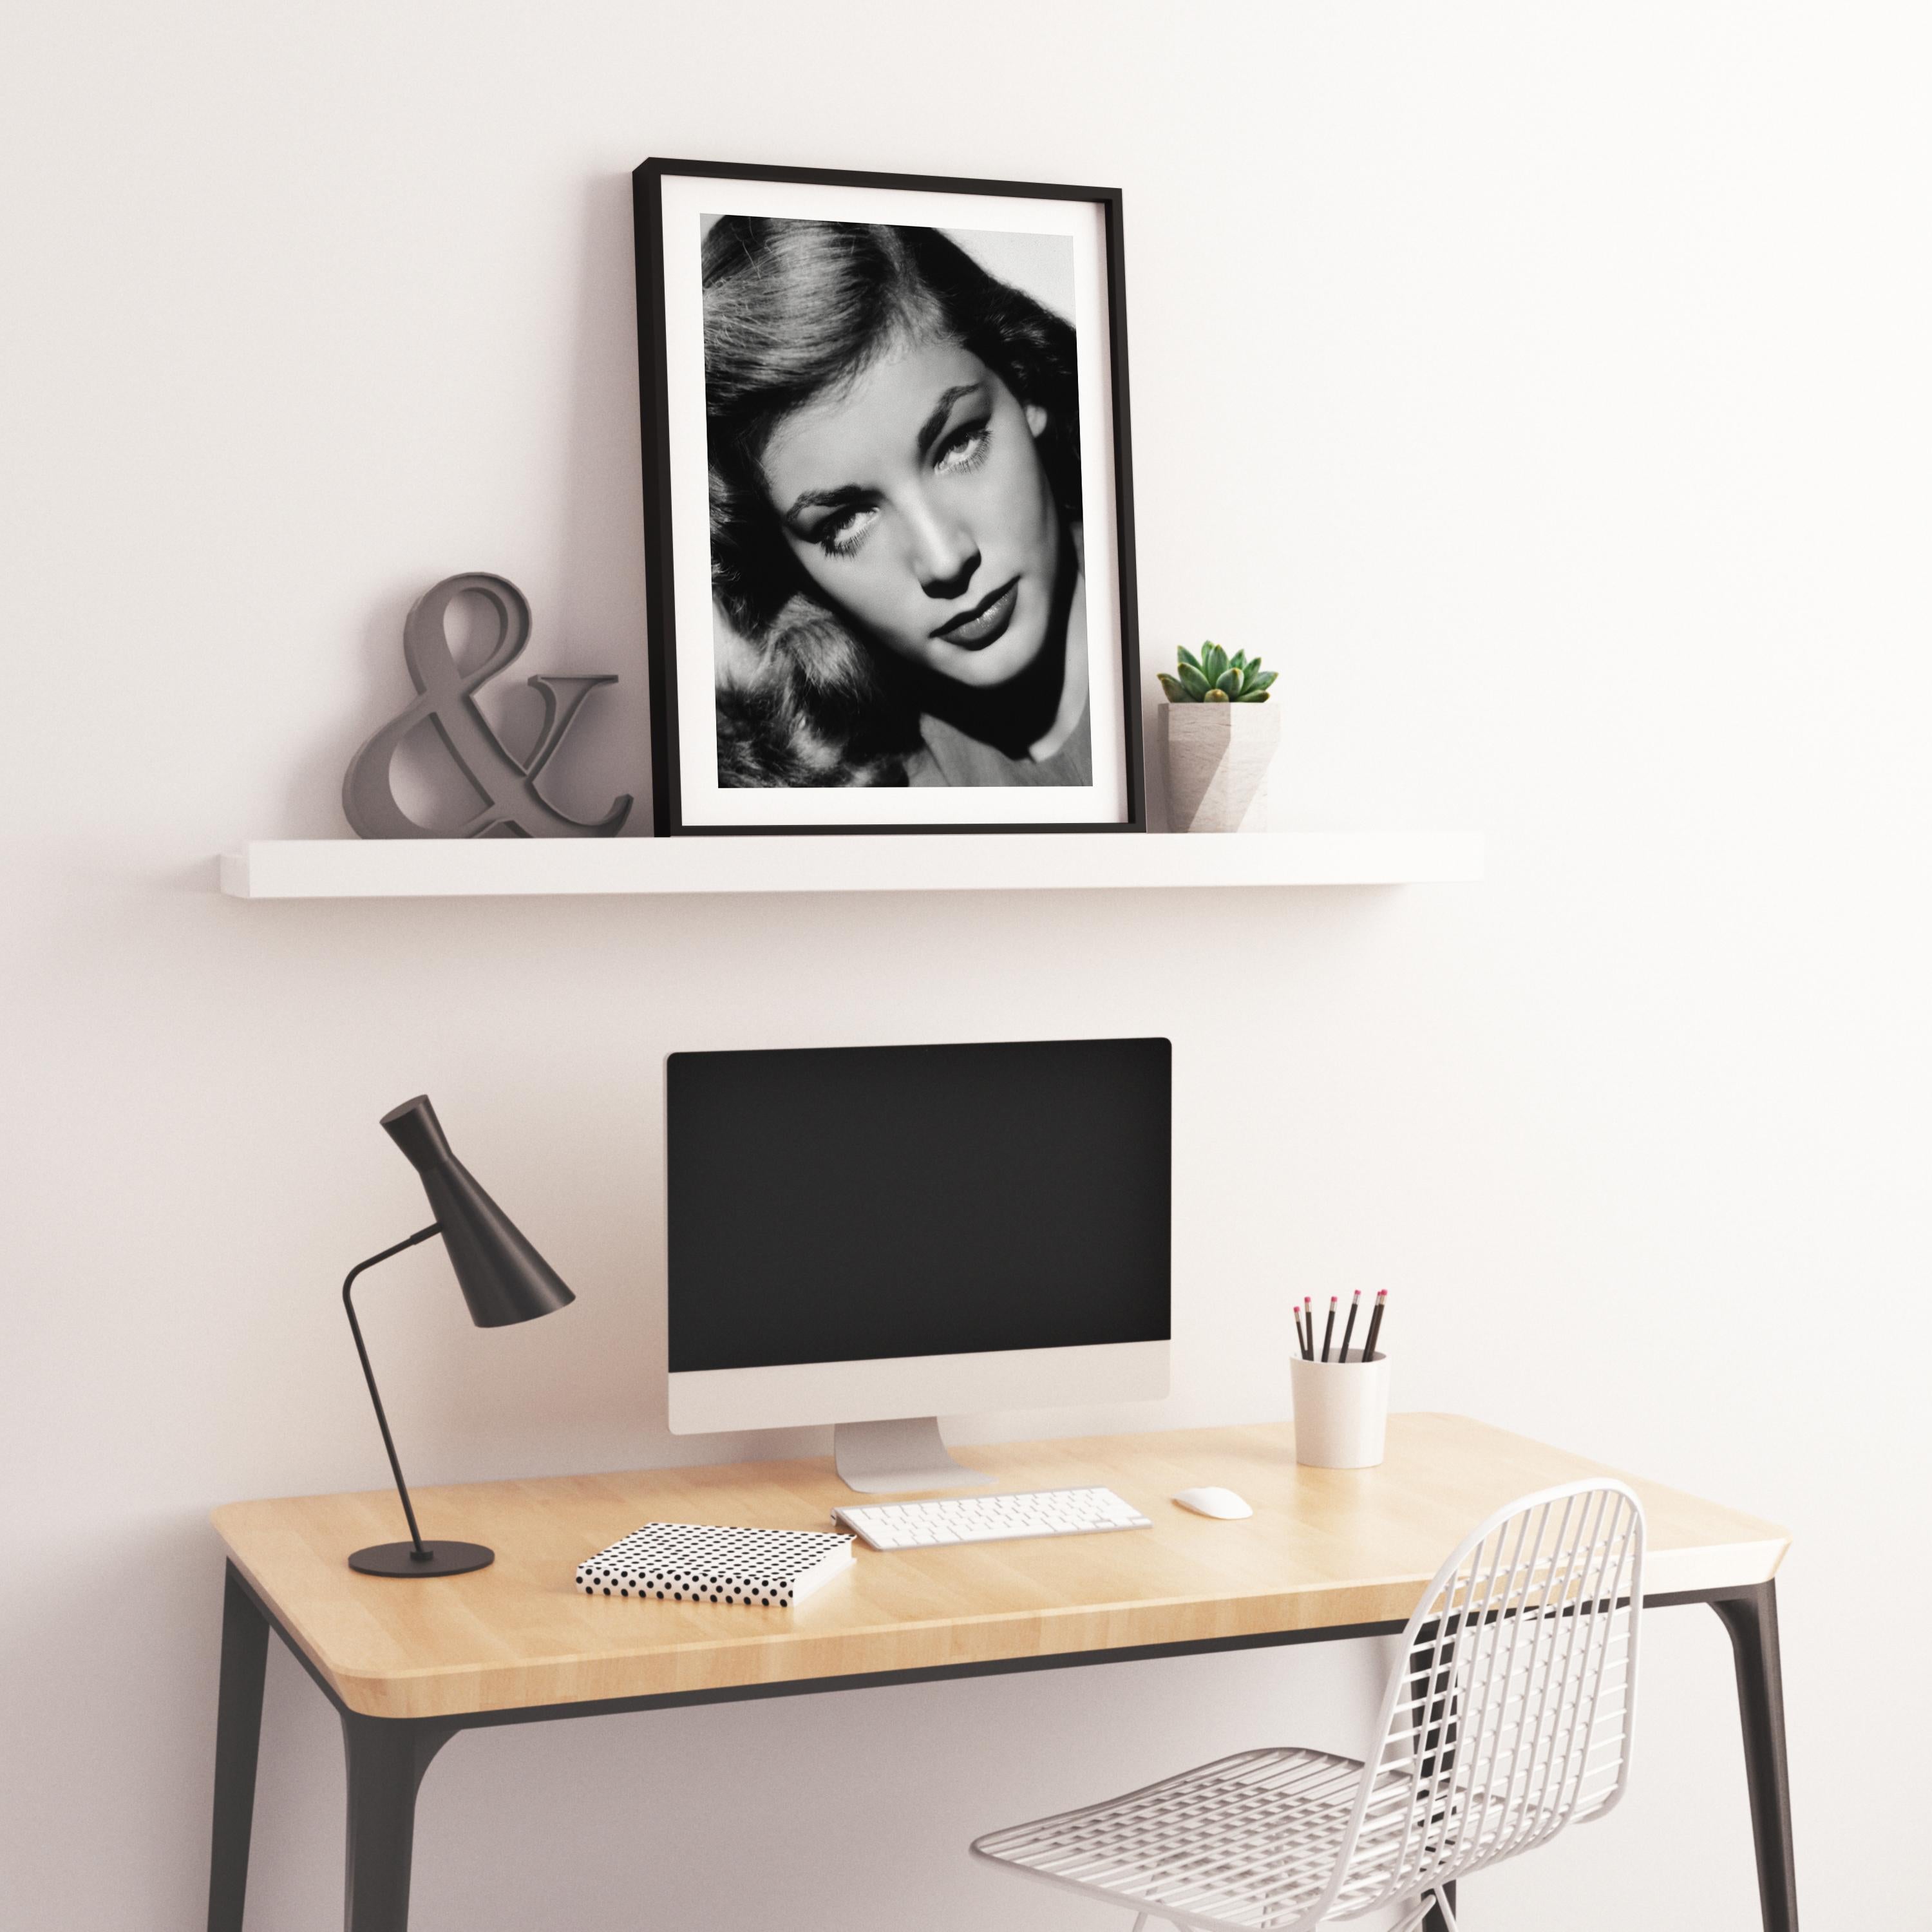 This candid black and white image features Lauren Bacall posed seductively in the studio, a closeup portrait.

Lauren Bacall was an American actress known for her distinctive voice and sultry looks. She was named the 20th greatest female star of